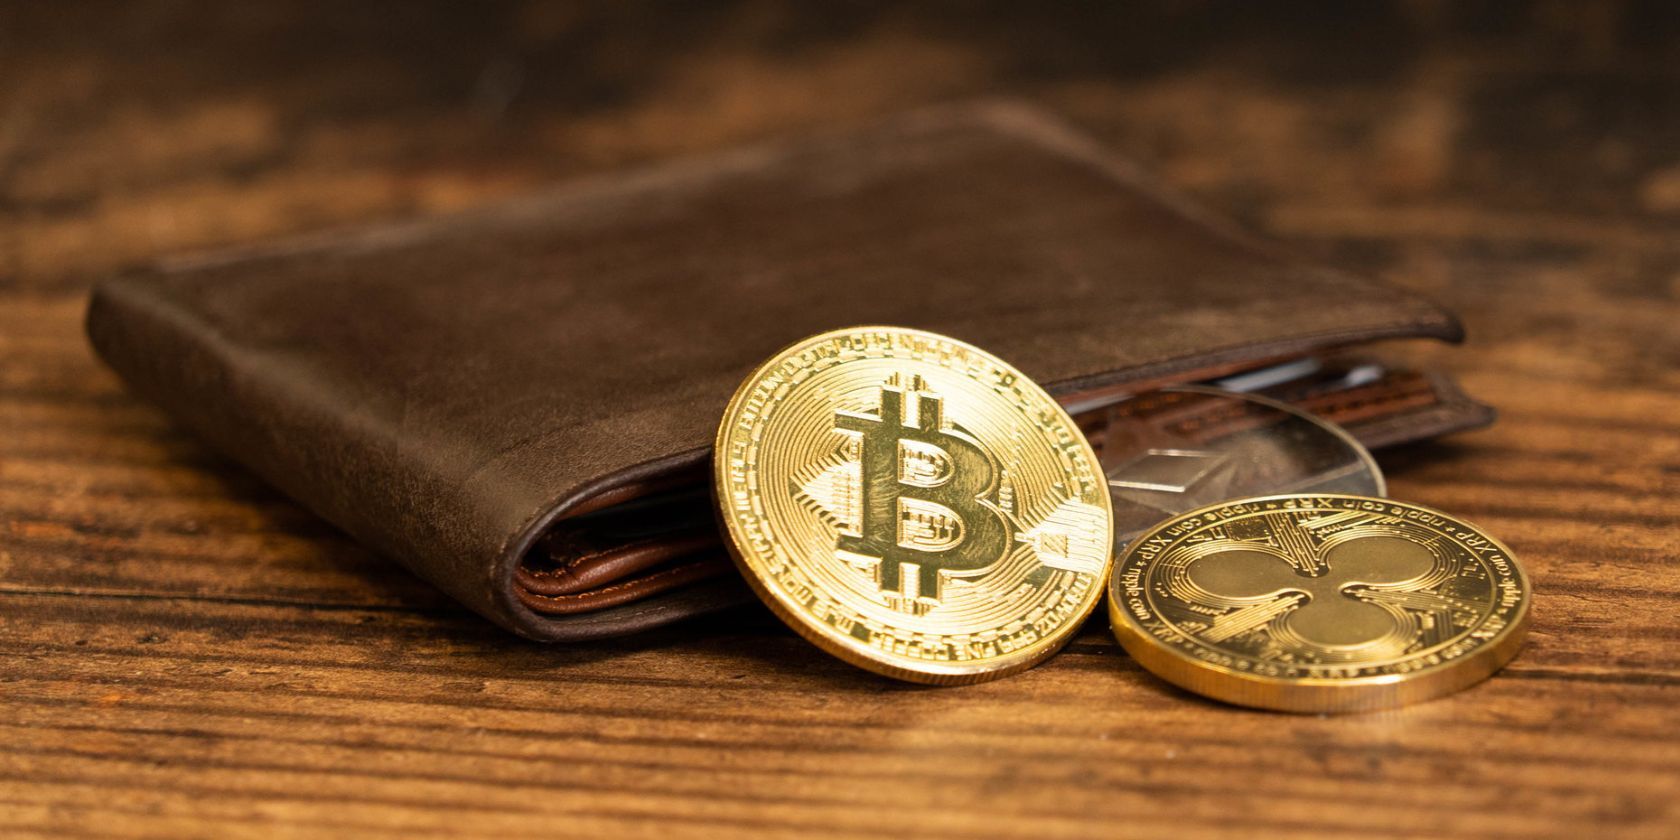 bitcoin and xrp coins next to brown leather wallet